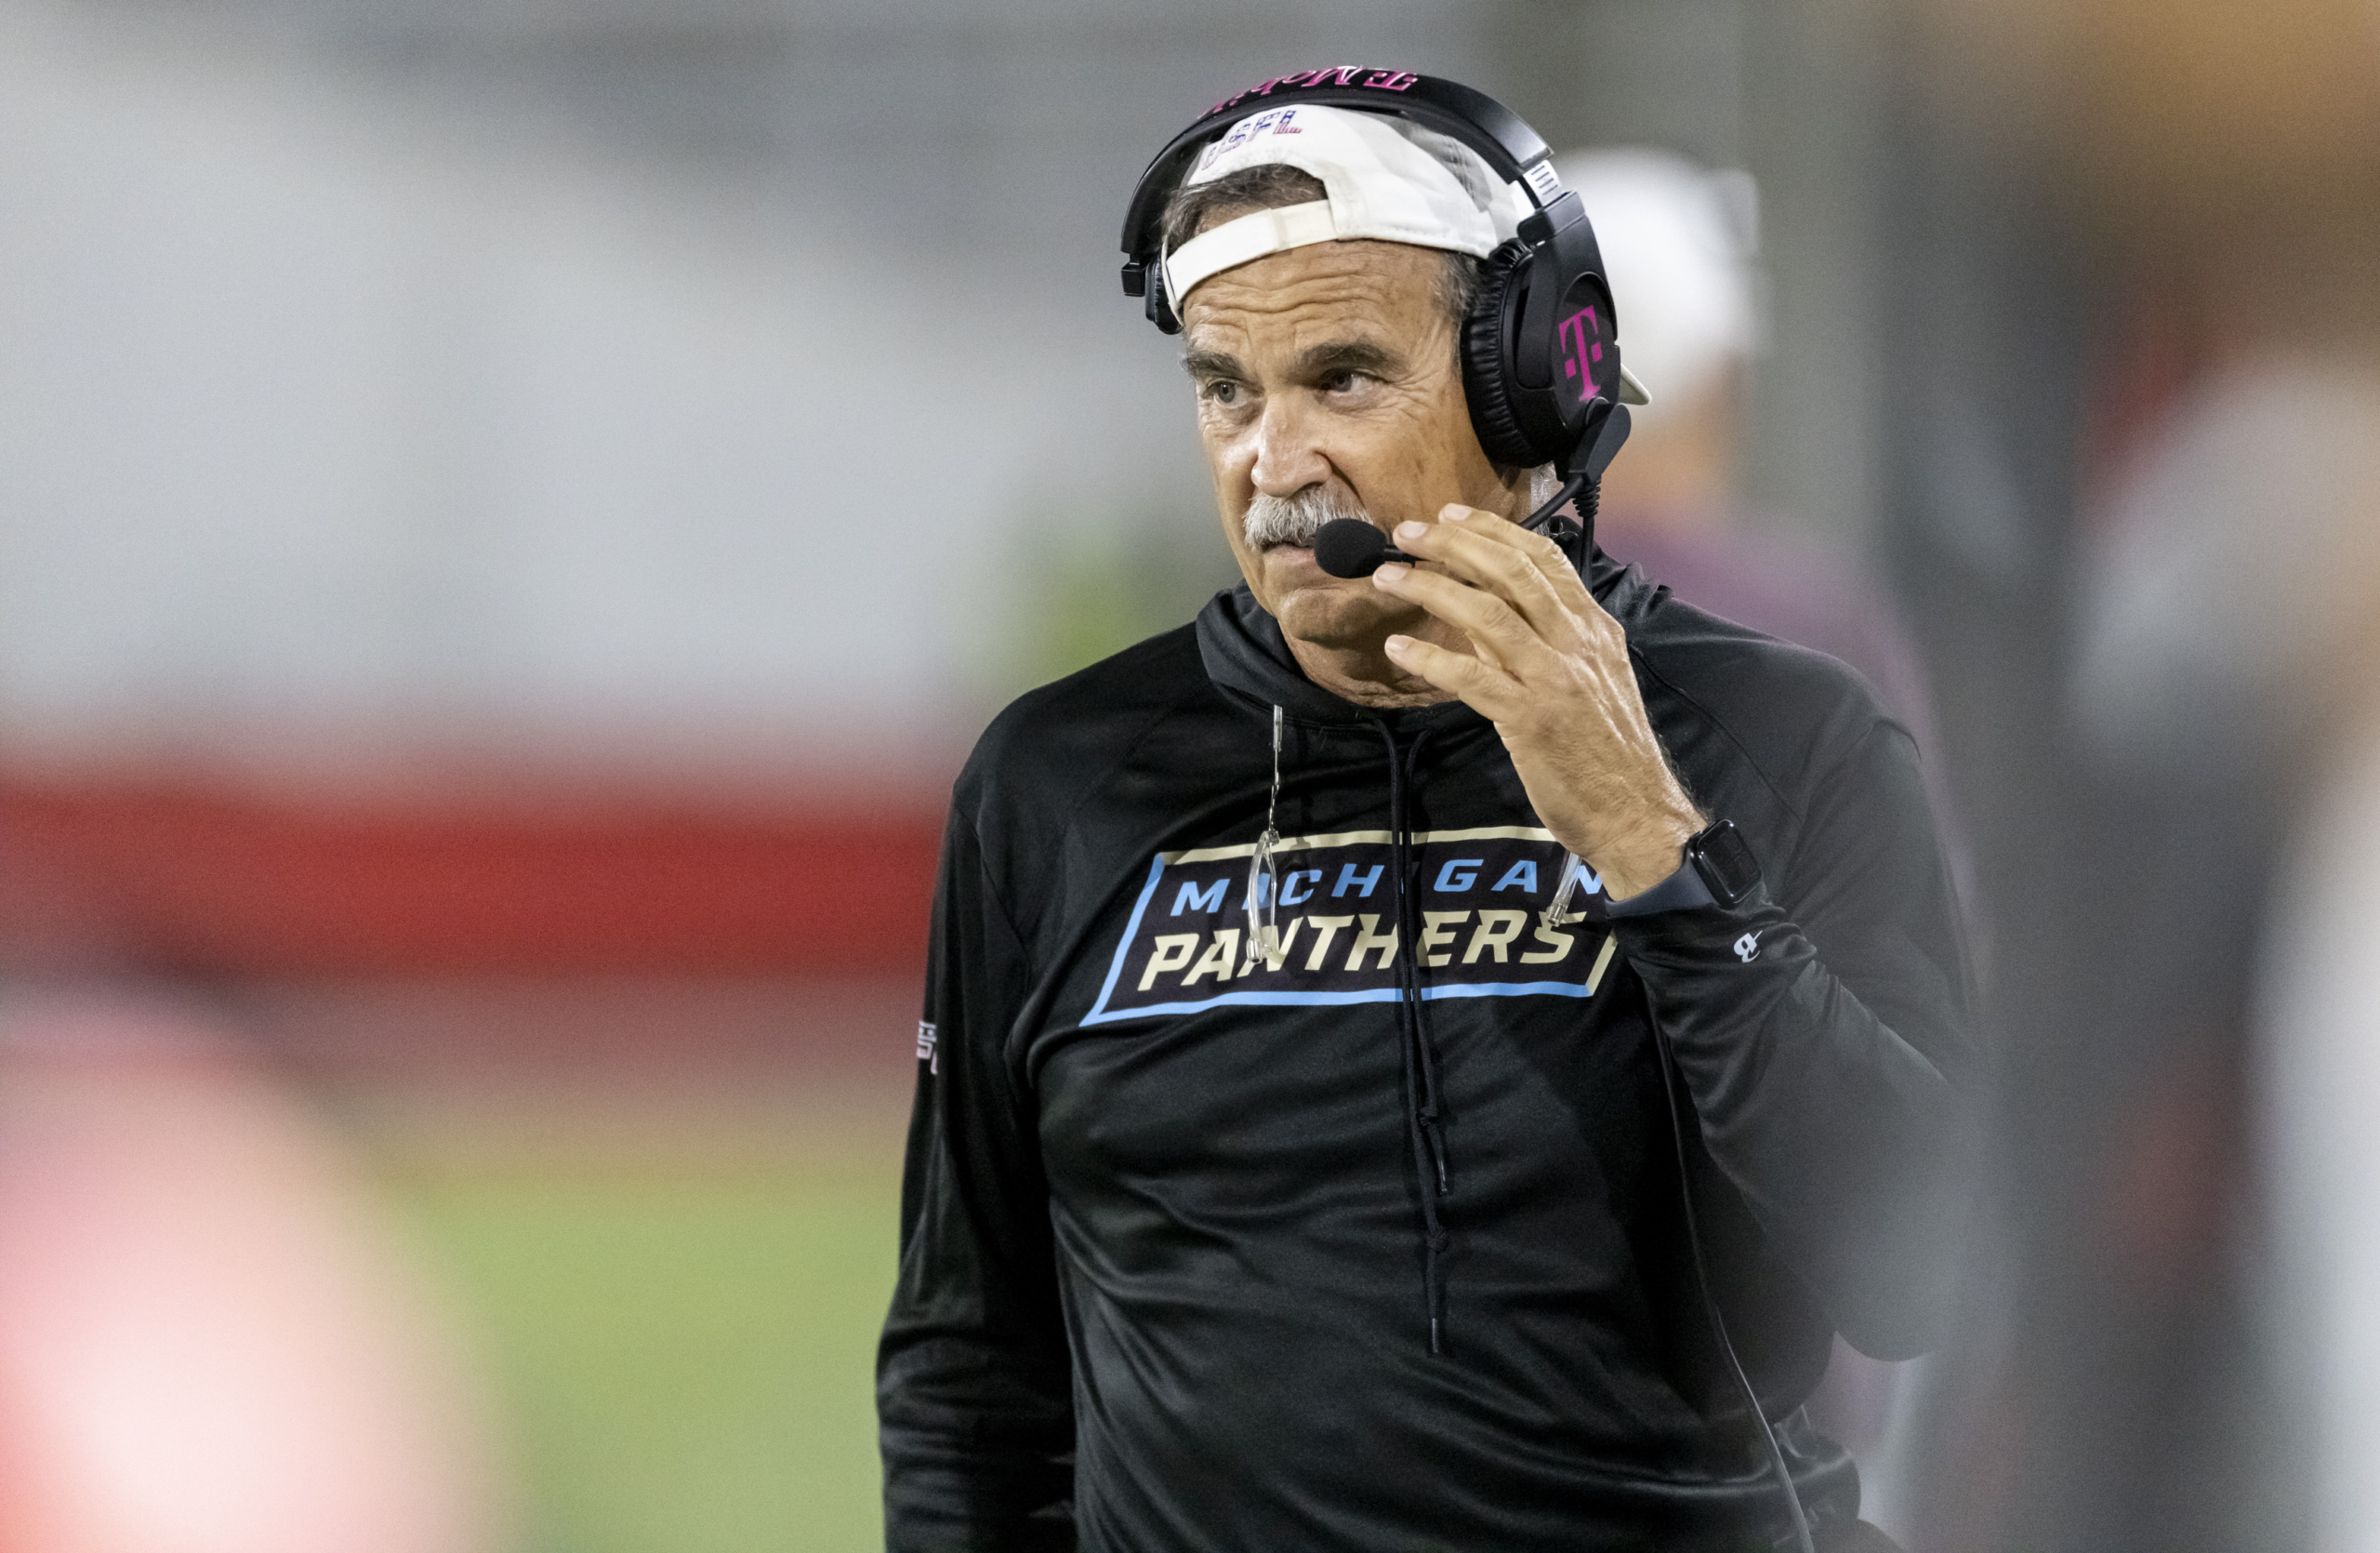 Jeff Fisher steps down from Michigan Panthers USFL head coach job, Mike Nolan takes over